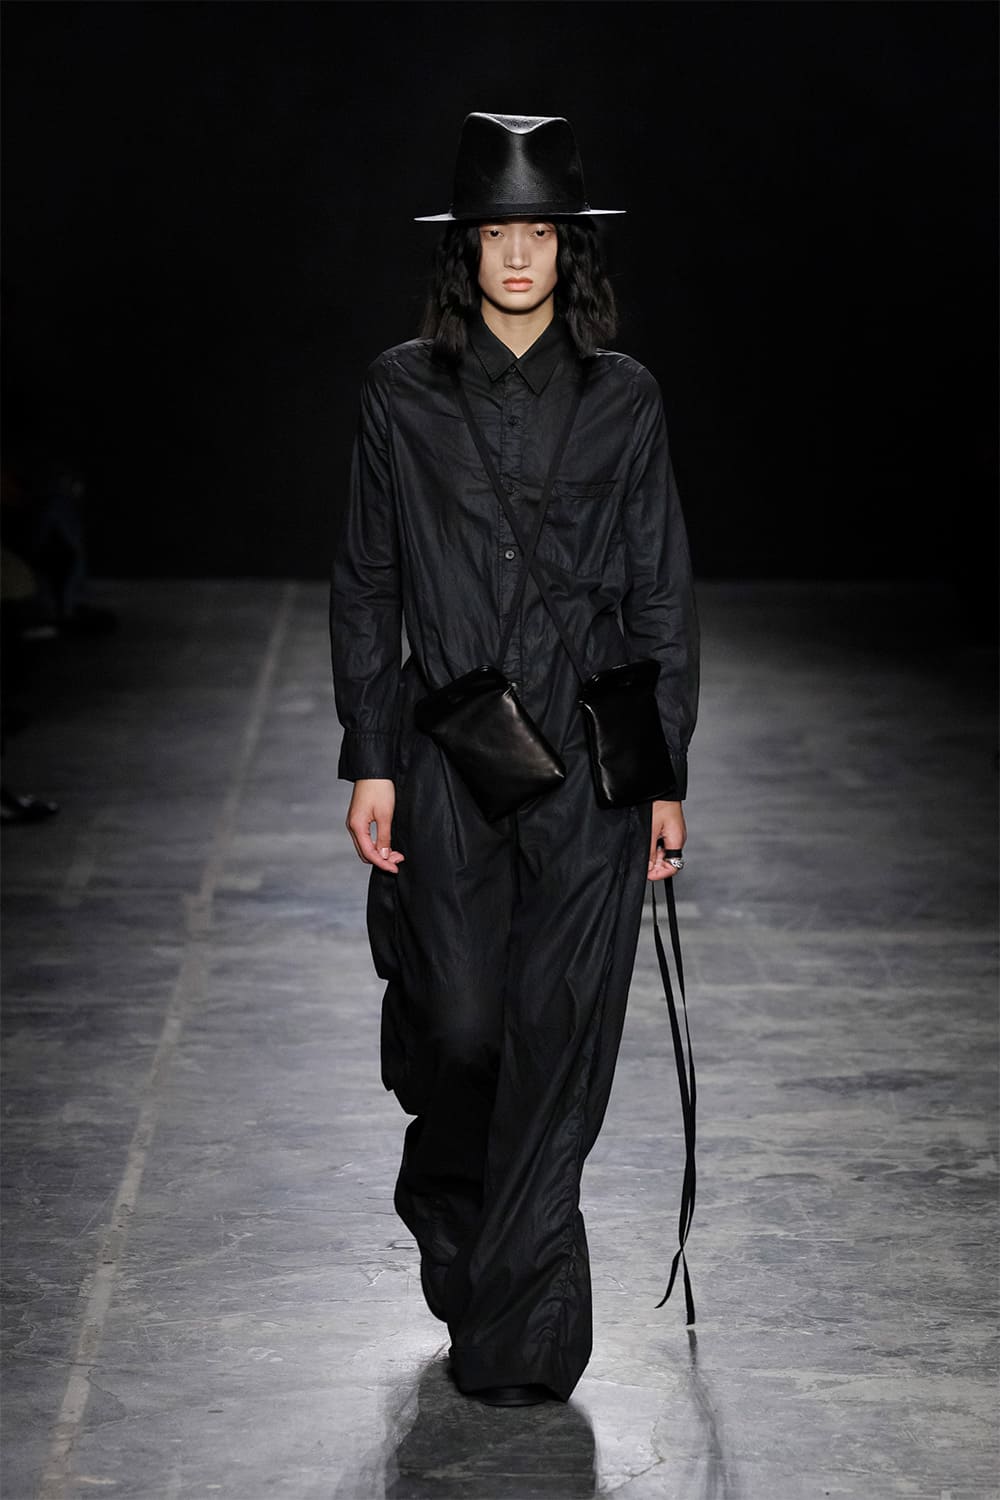 ANN DEMEULEMEESTER | COLLECTION | HOUYHNHNM ...